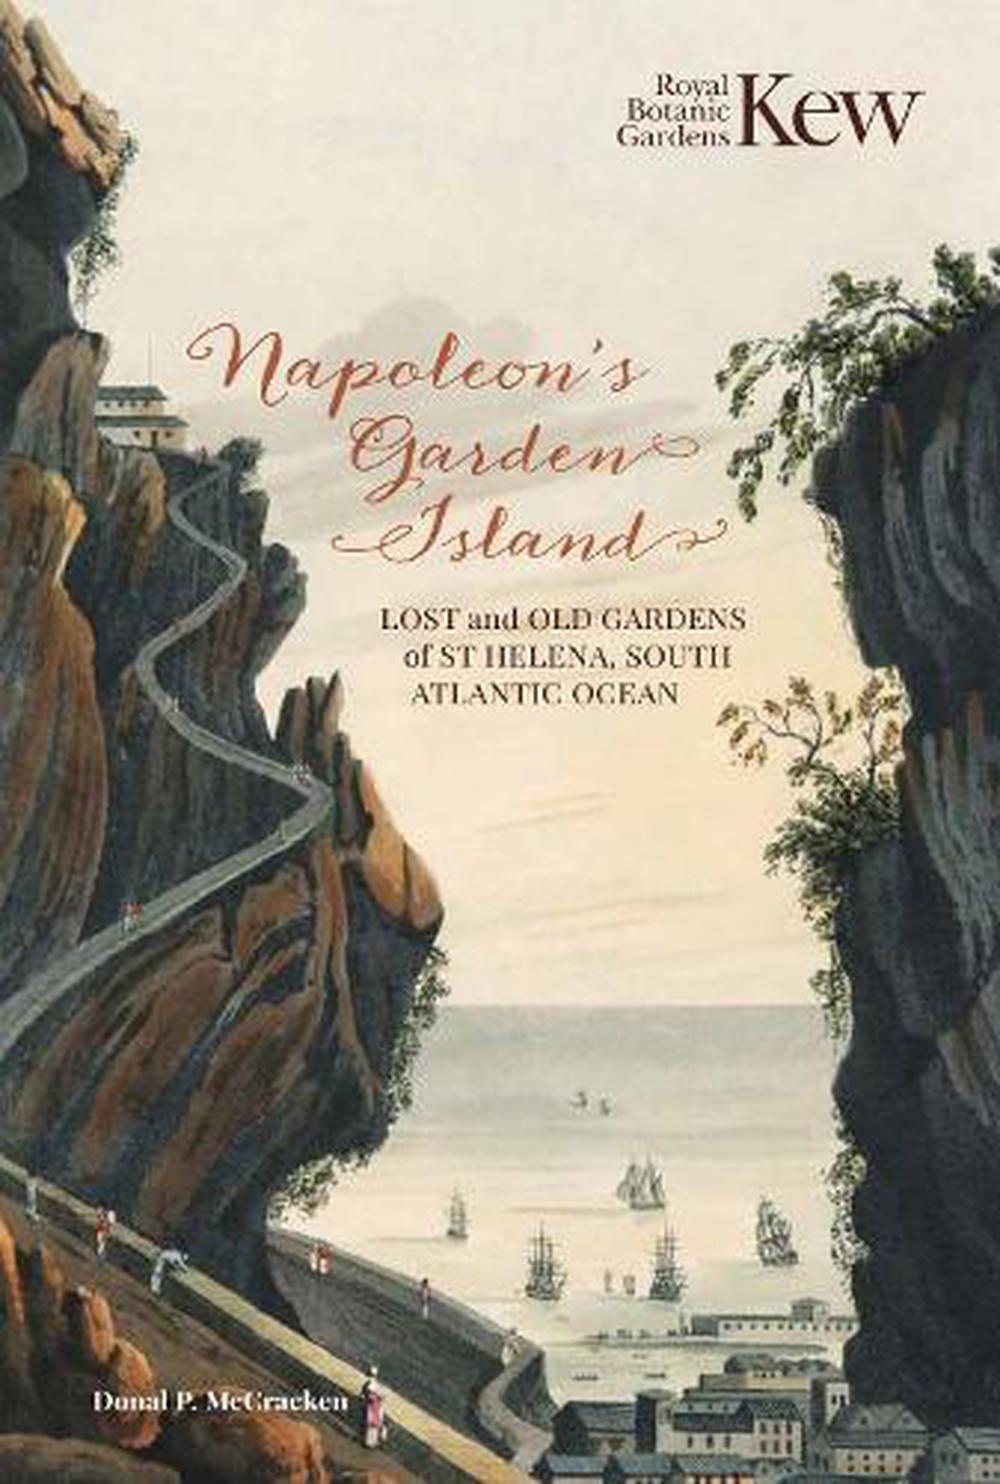 Napoleons Garden Island: Lost and old gardens of St Helena, South Atlantic Ocean